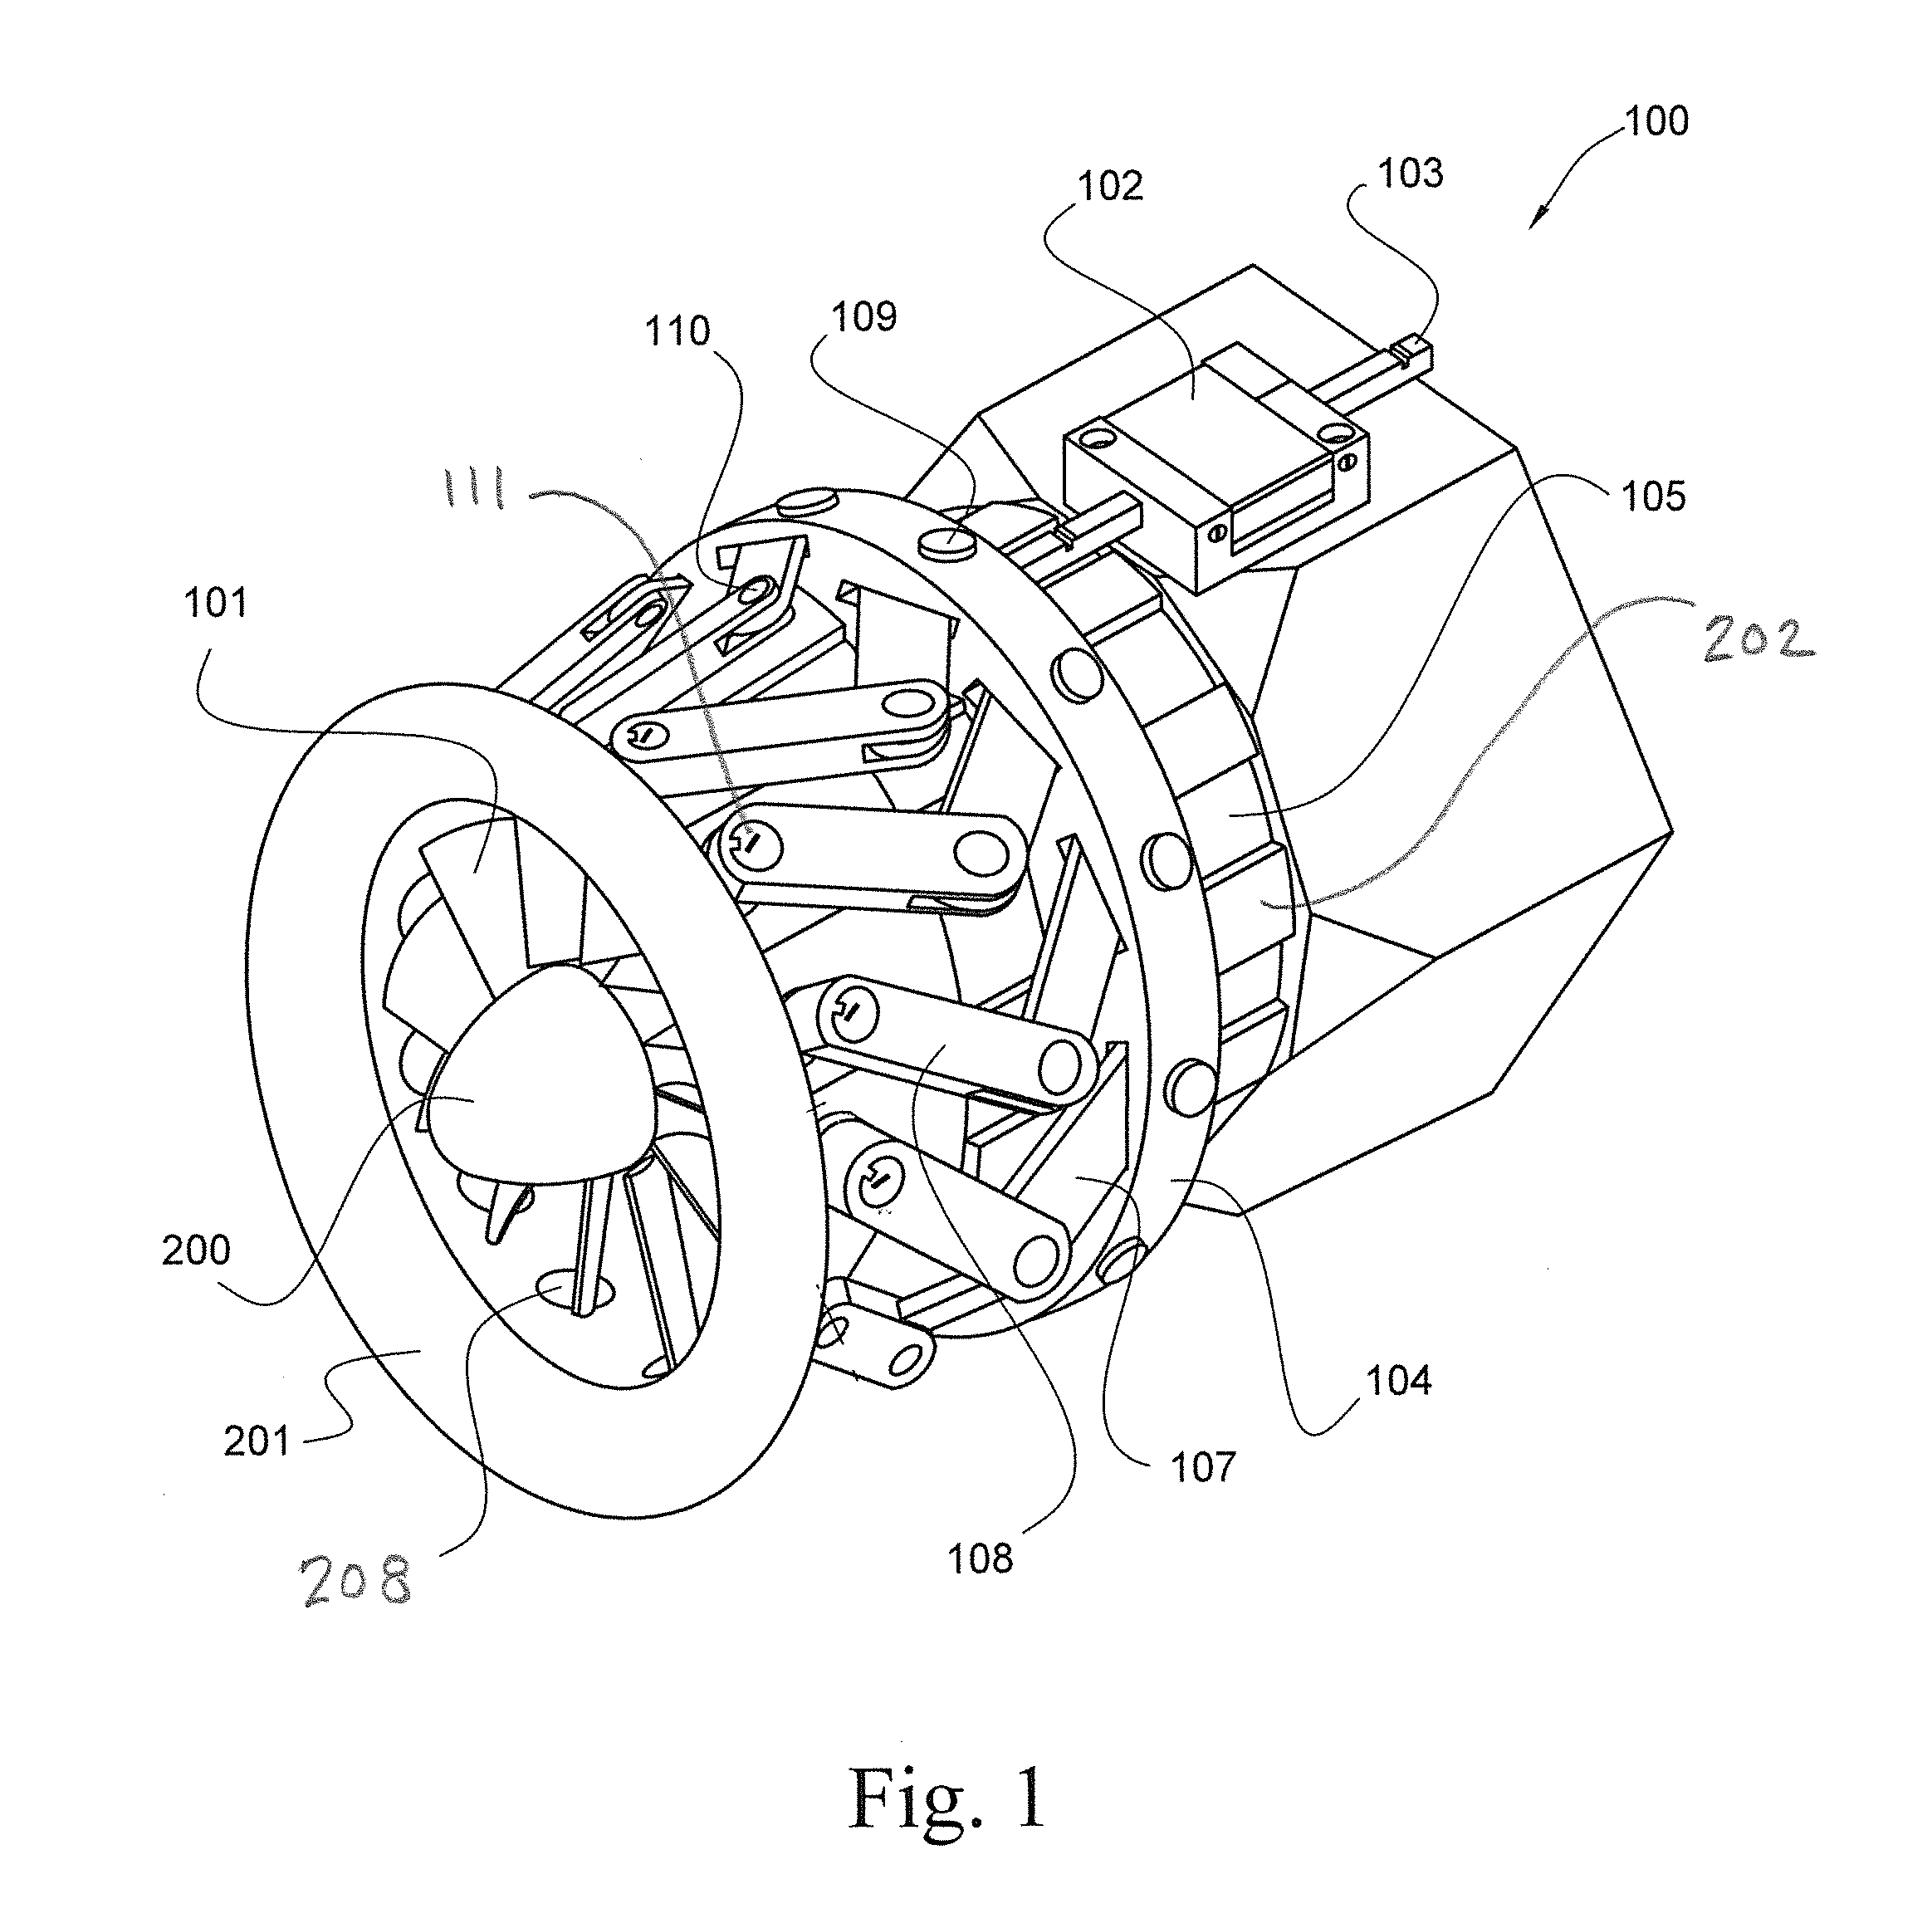 Apparatus and method for rotating fluid controlling vanes in small turbine engines and other applications